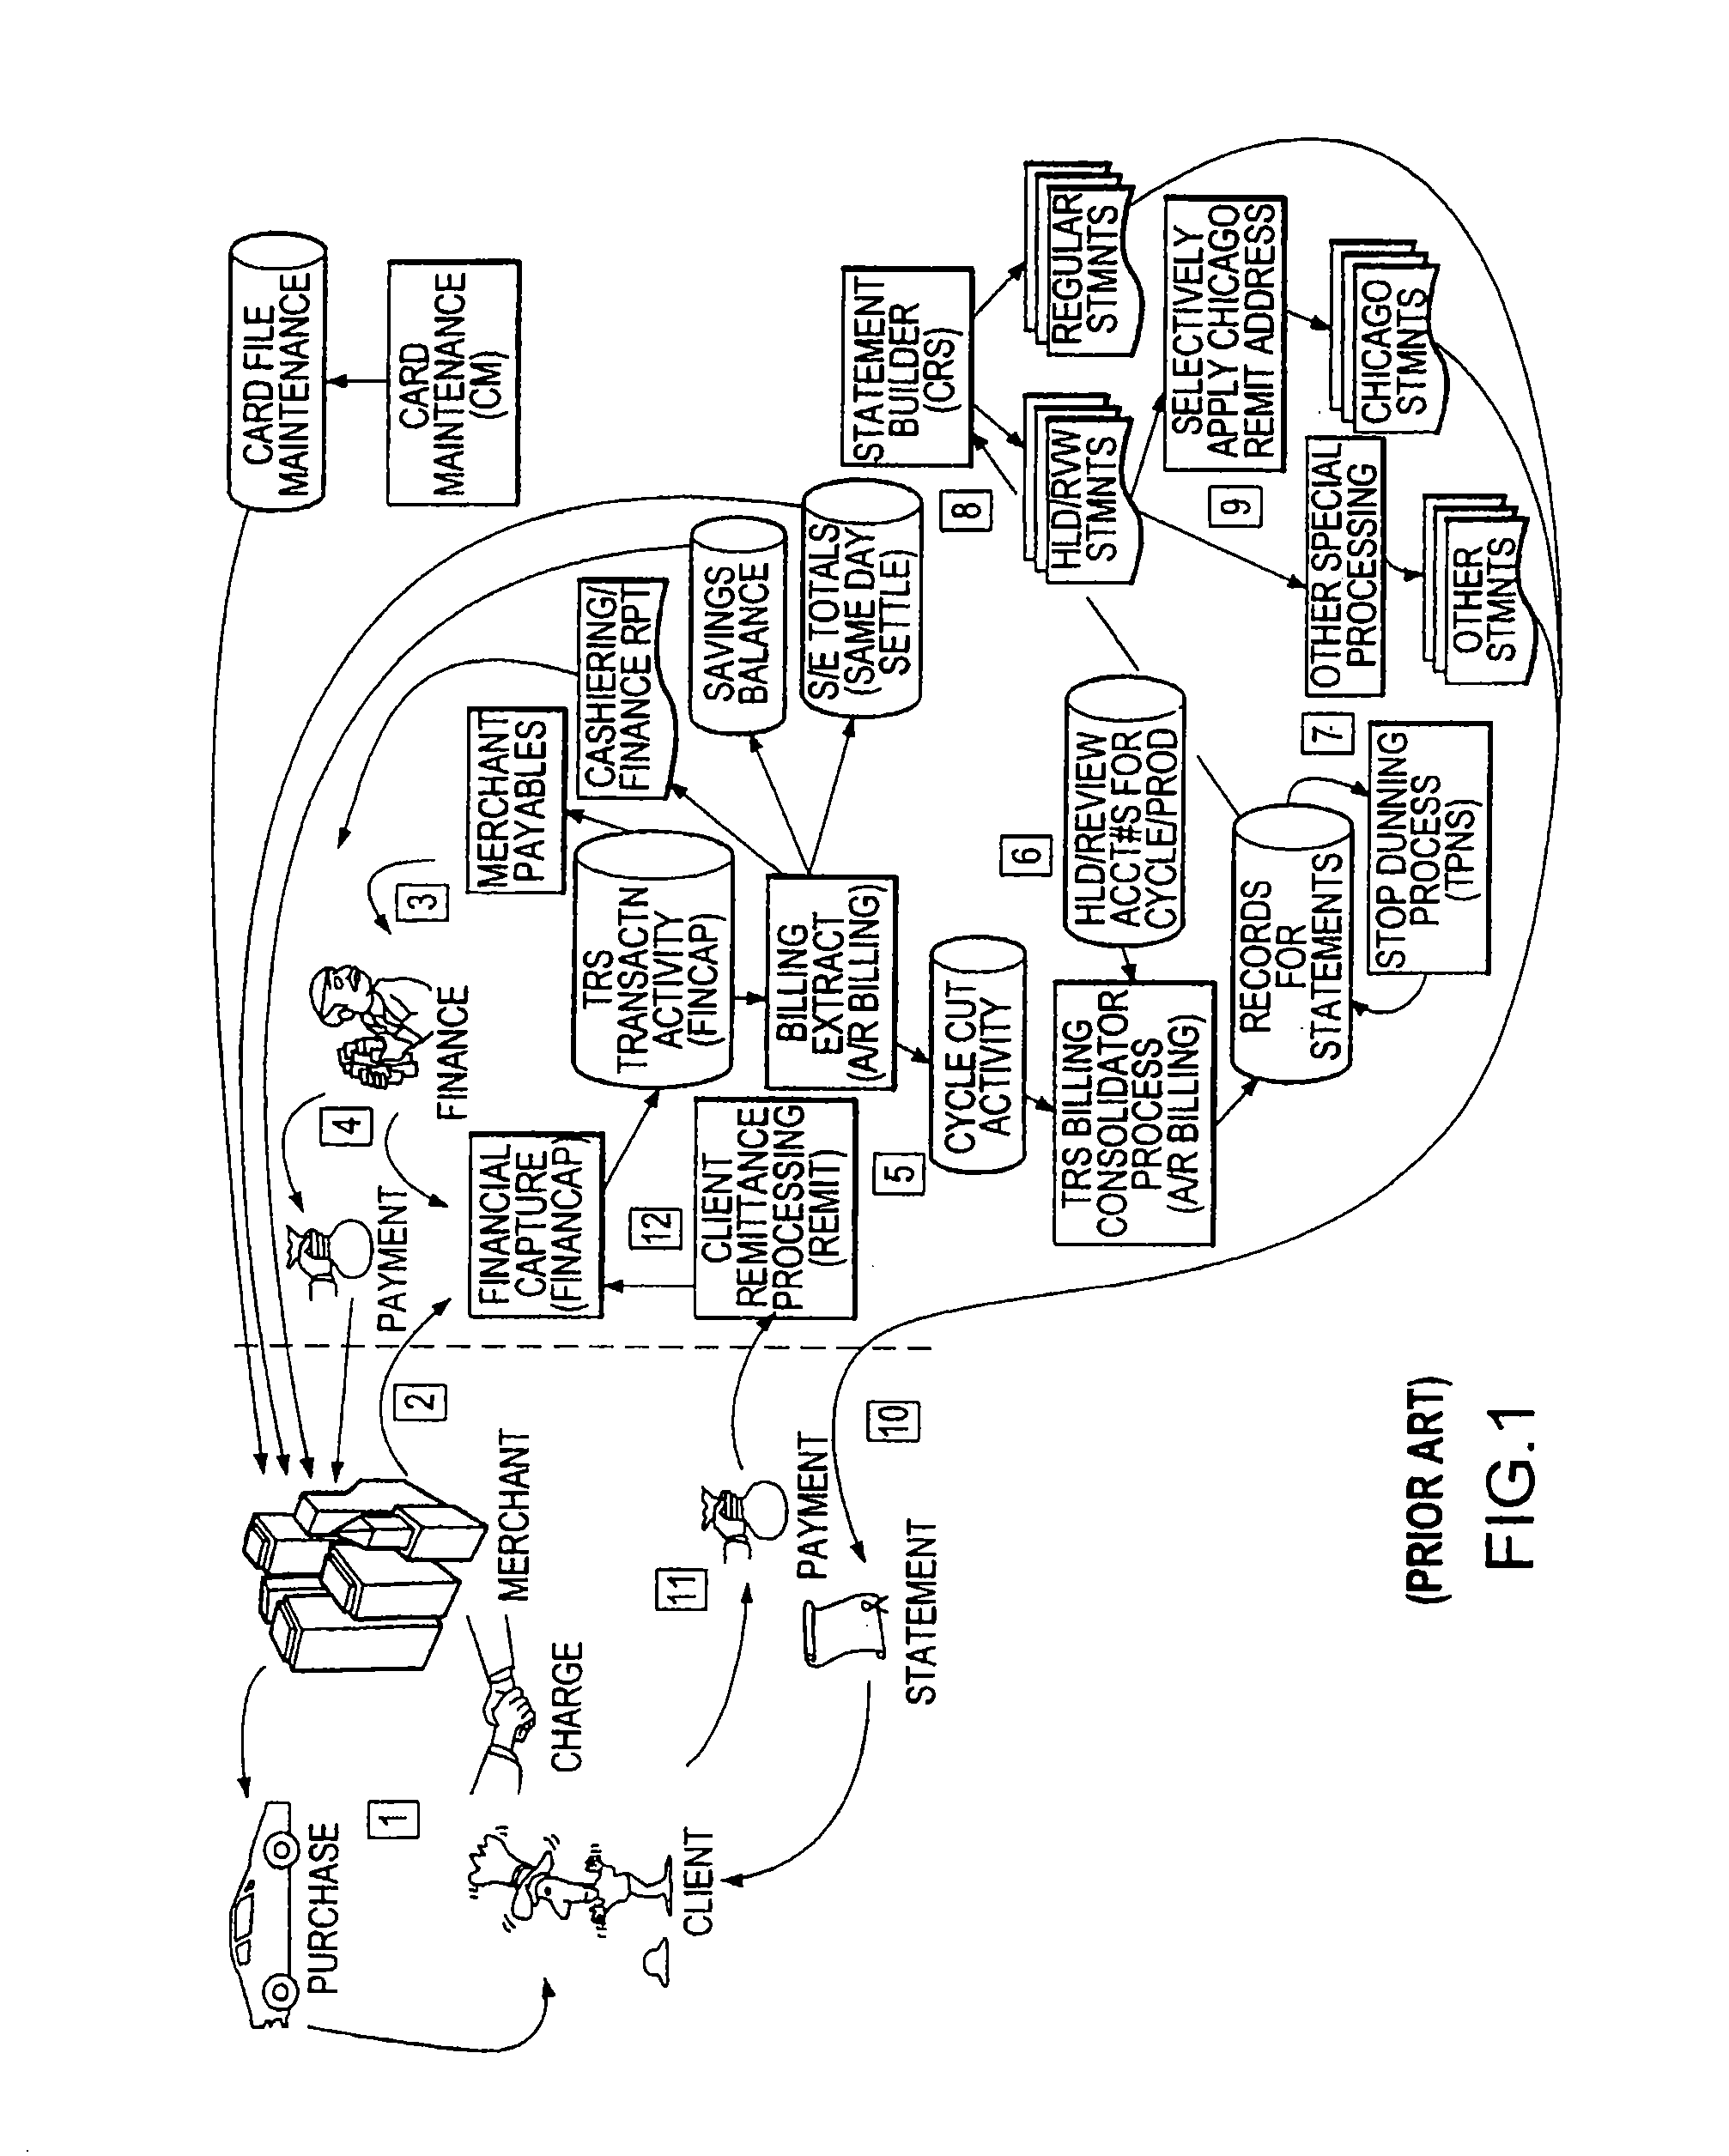 System and method for dividing a remittance and distributing a portion of the funds to multiple investment products